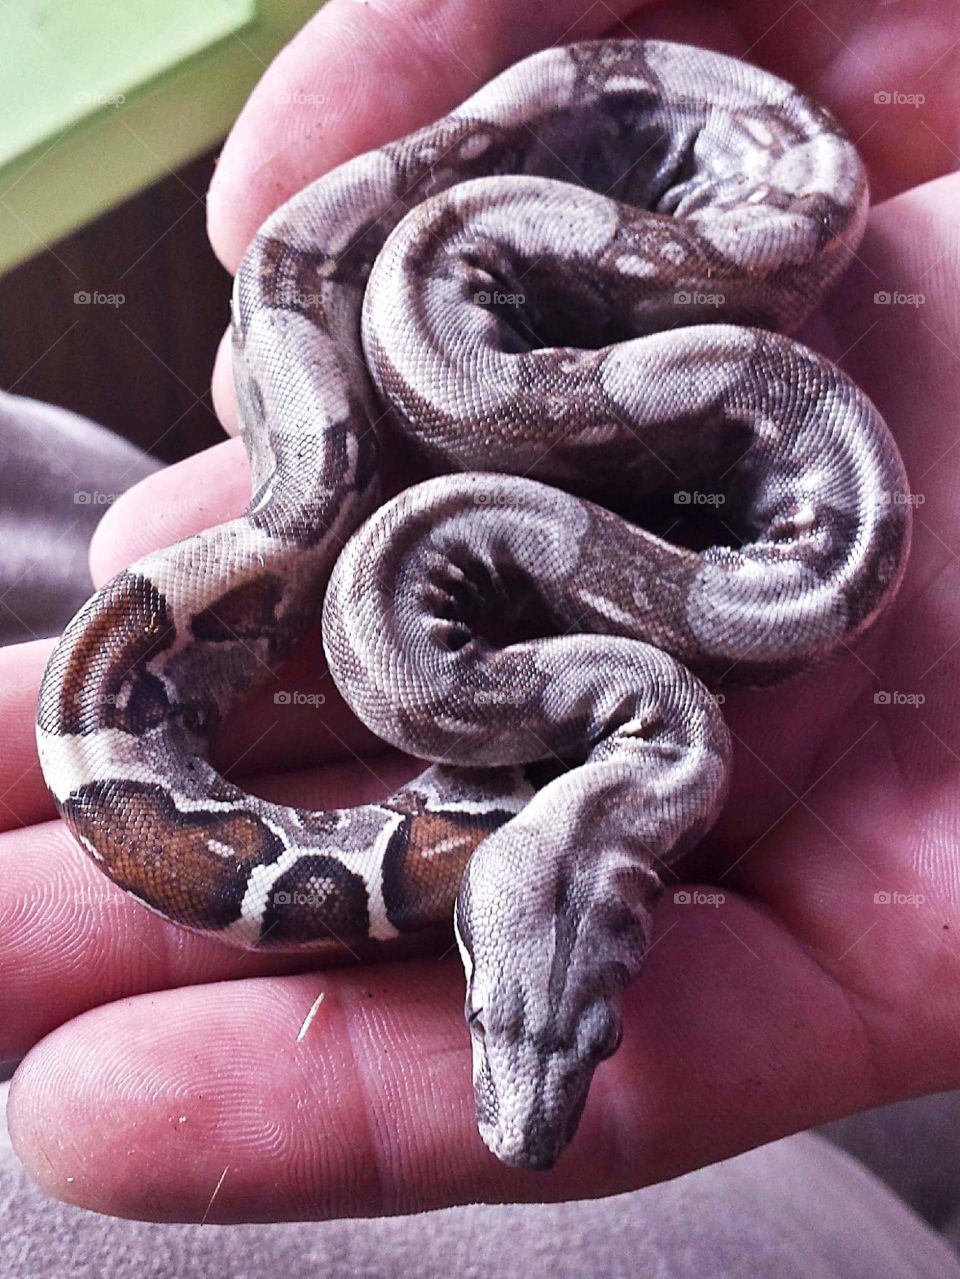 Baby columbian red tailed boa snakes